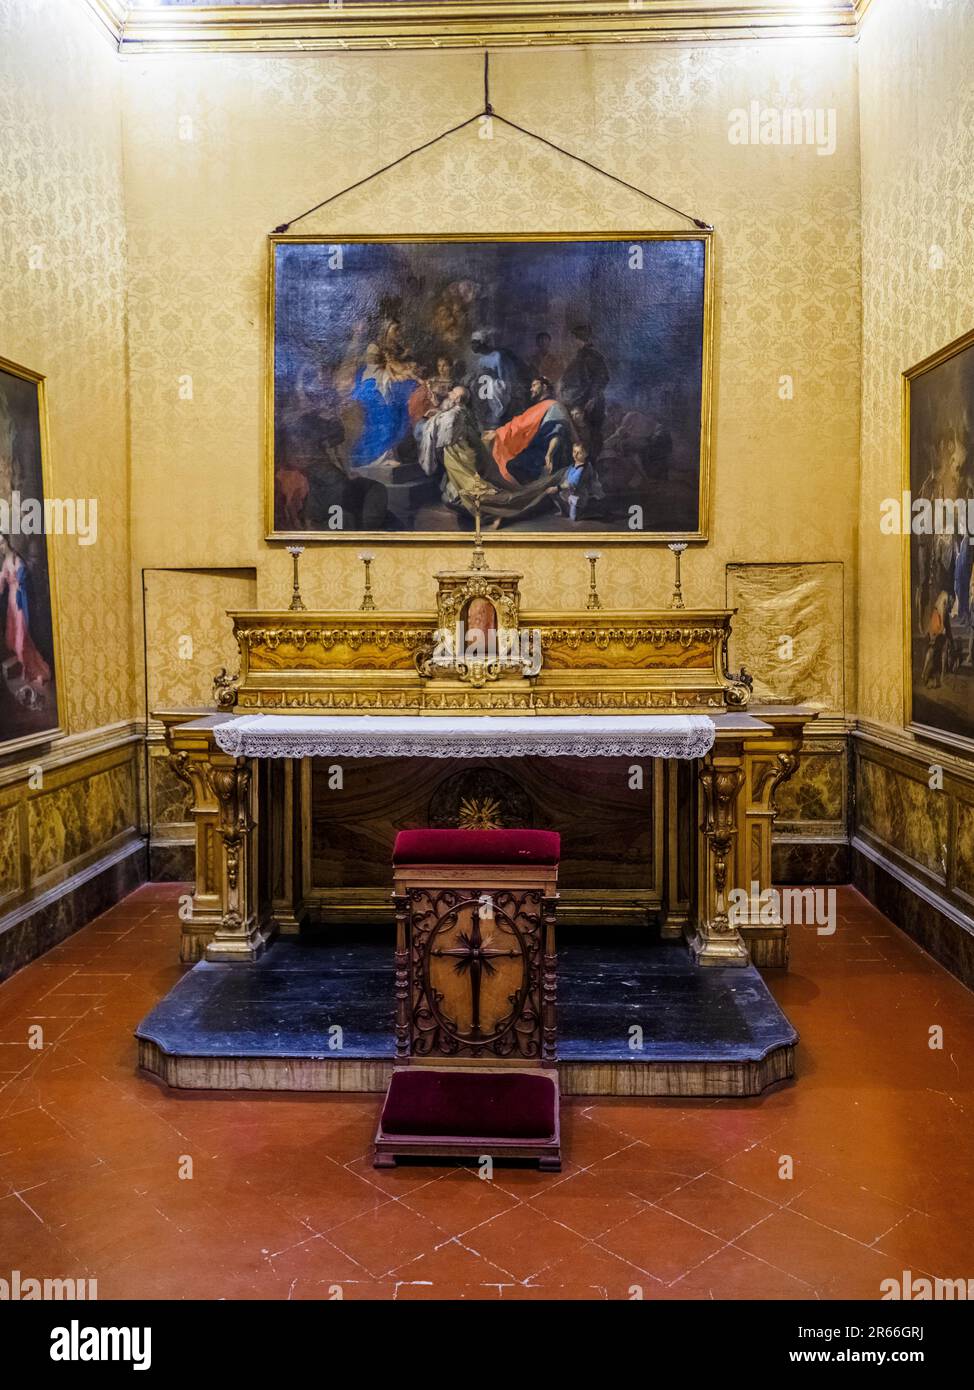 19th century wooden Altar and Nativity painting by Fancesco Liani (1760) in the Oratory of the Royal Palace of Naples that In 1734 became the royal residence of the Bourbons - Naples, Italy Stock Photo